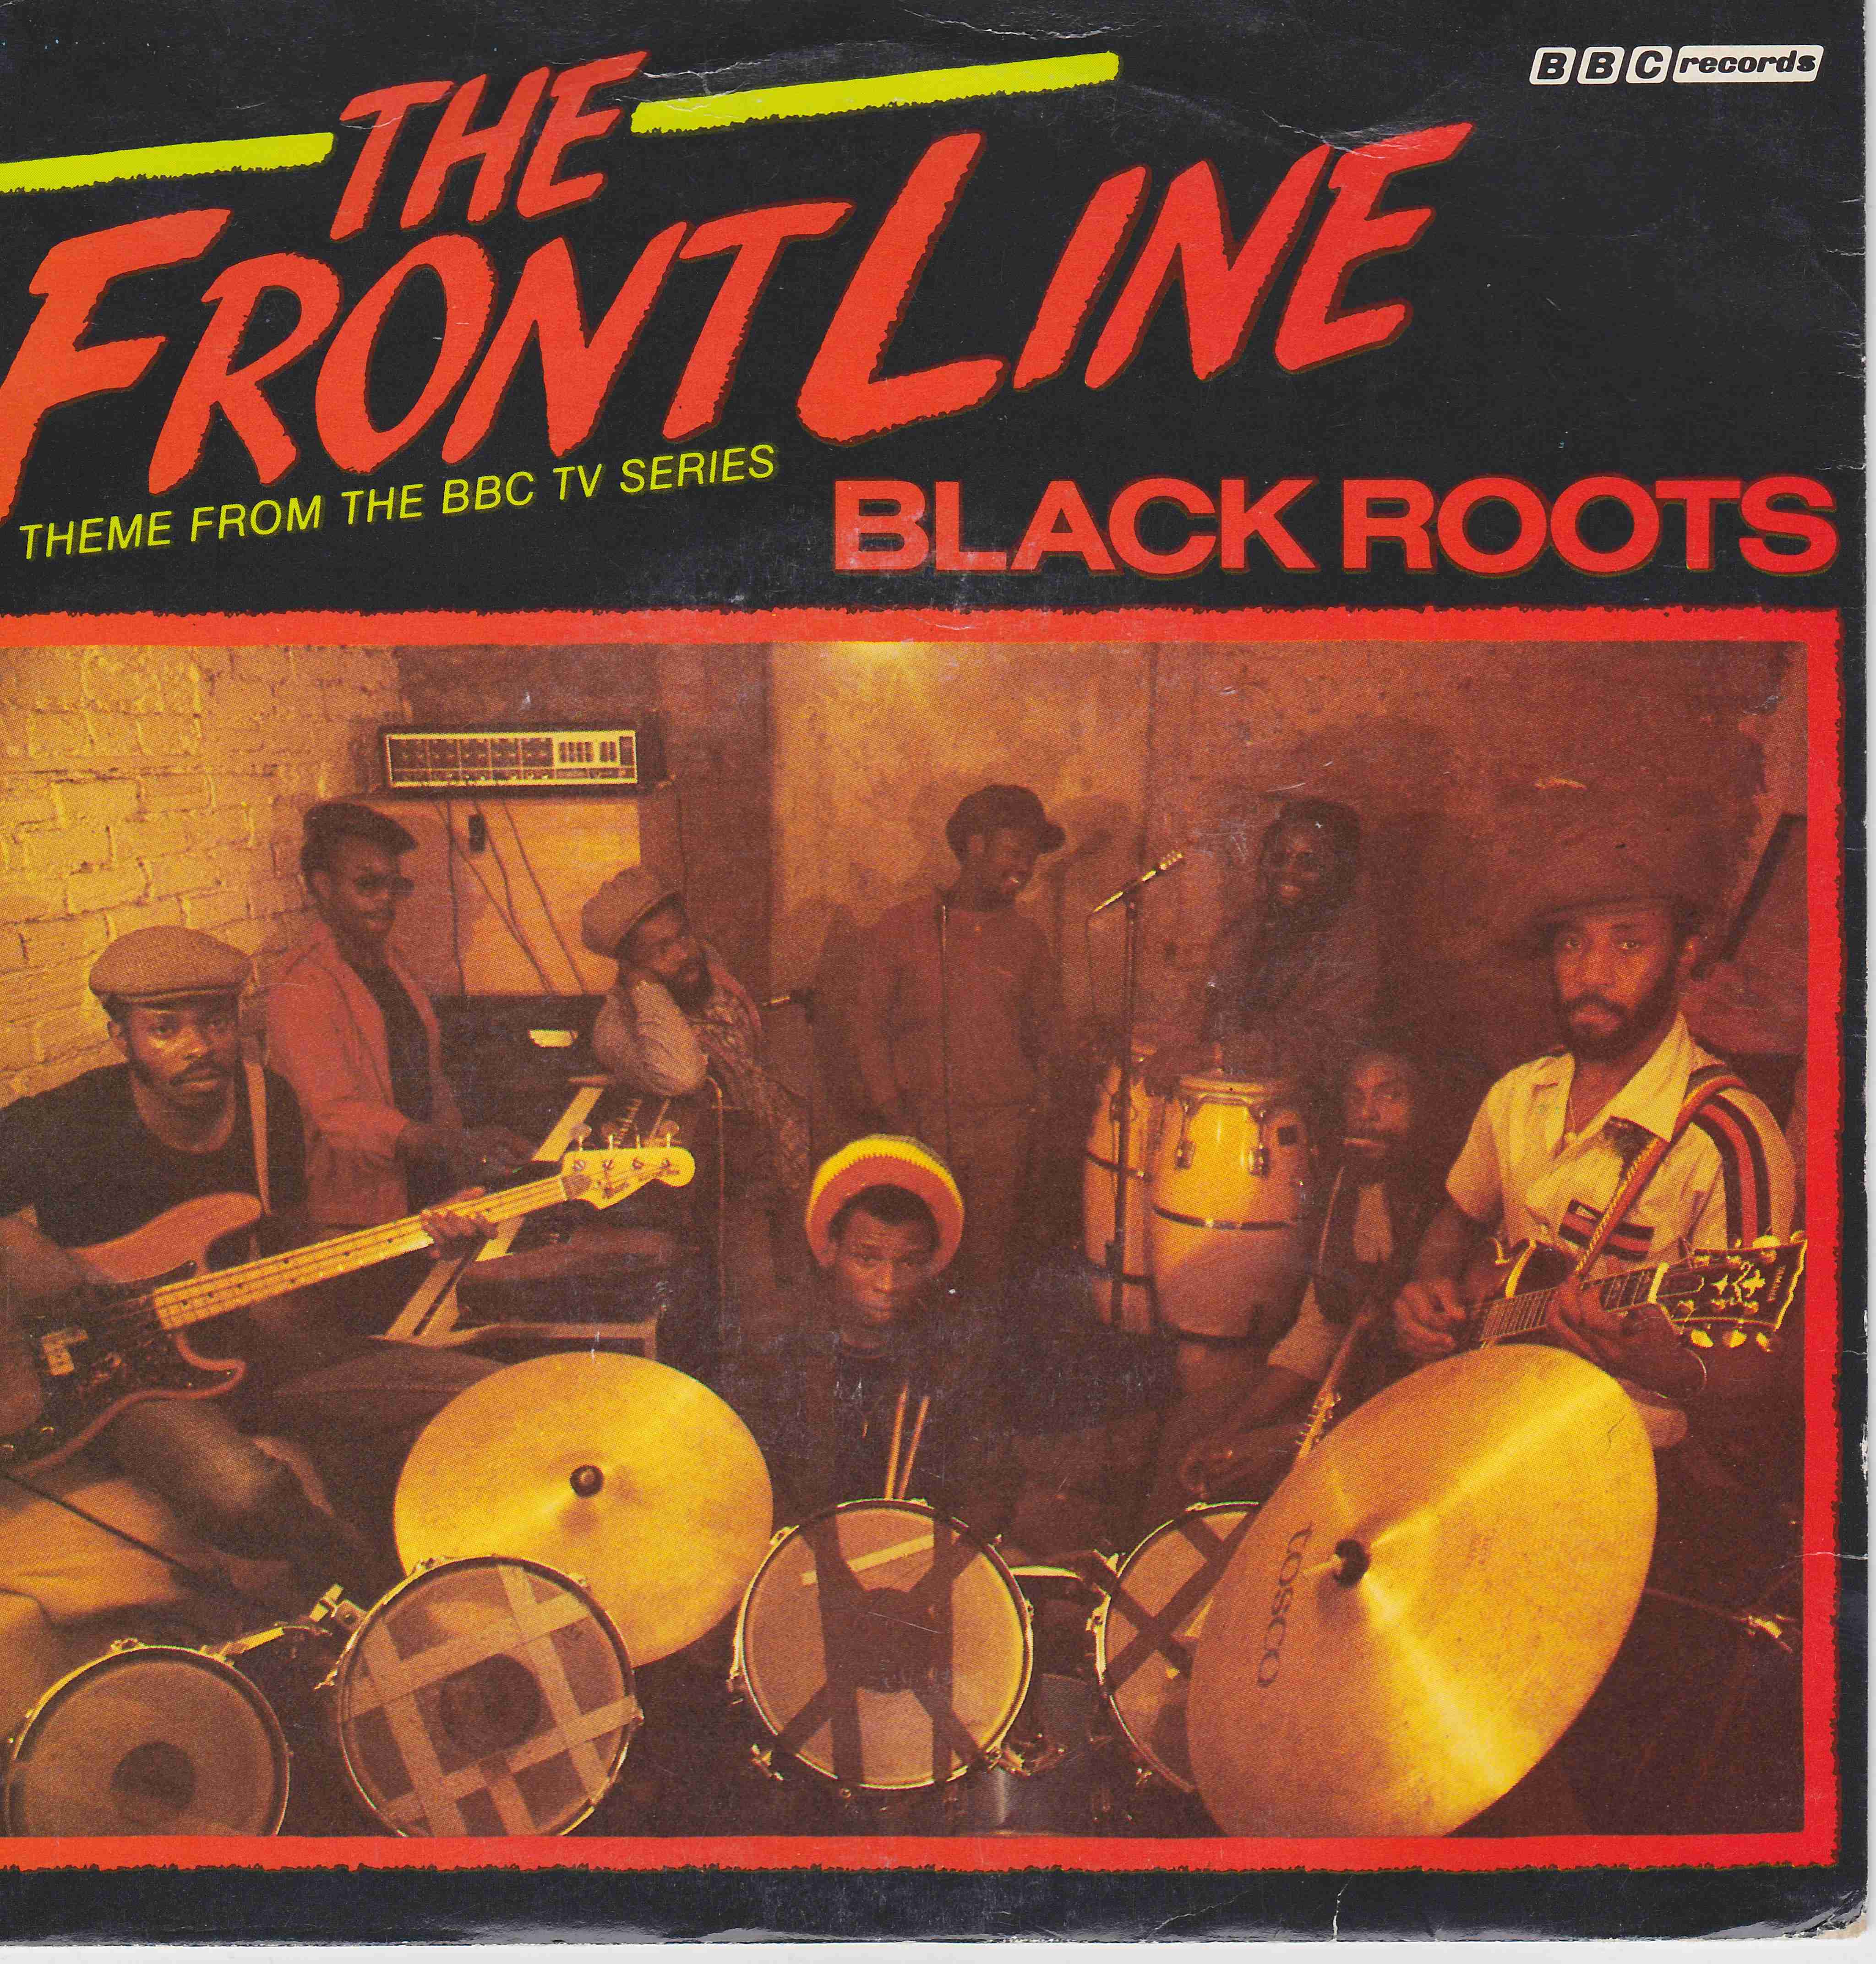 Picture of RESL 148 The front line by artist Black Roots from the BBC records and Tapes library